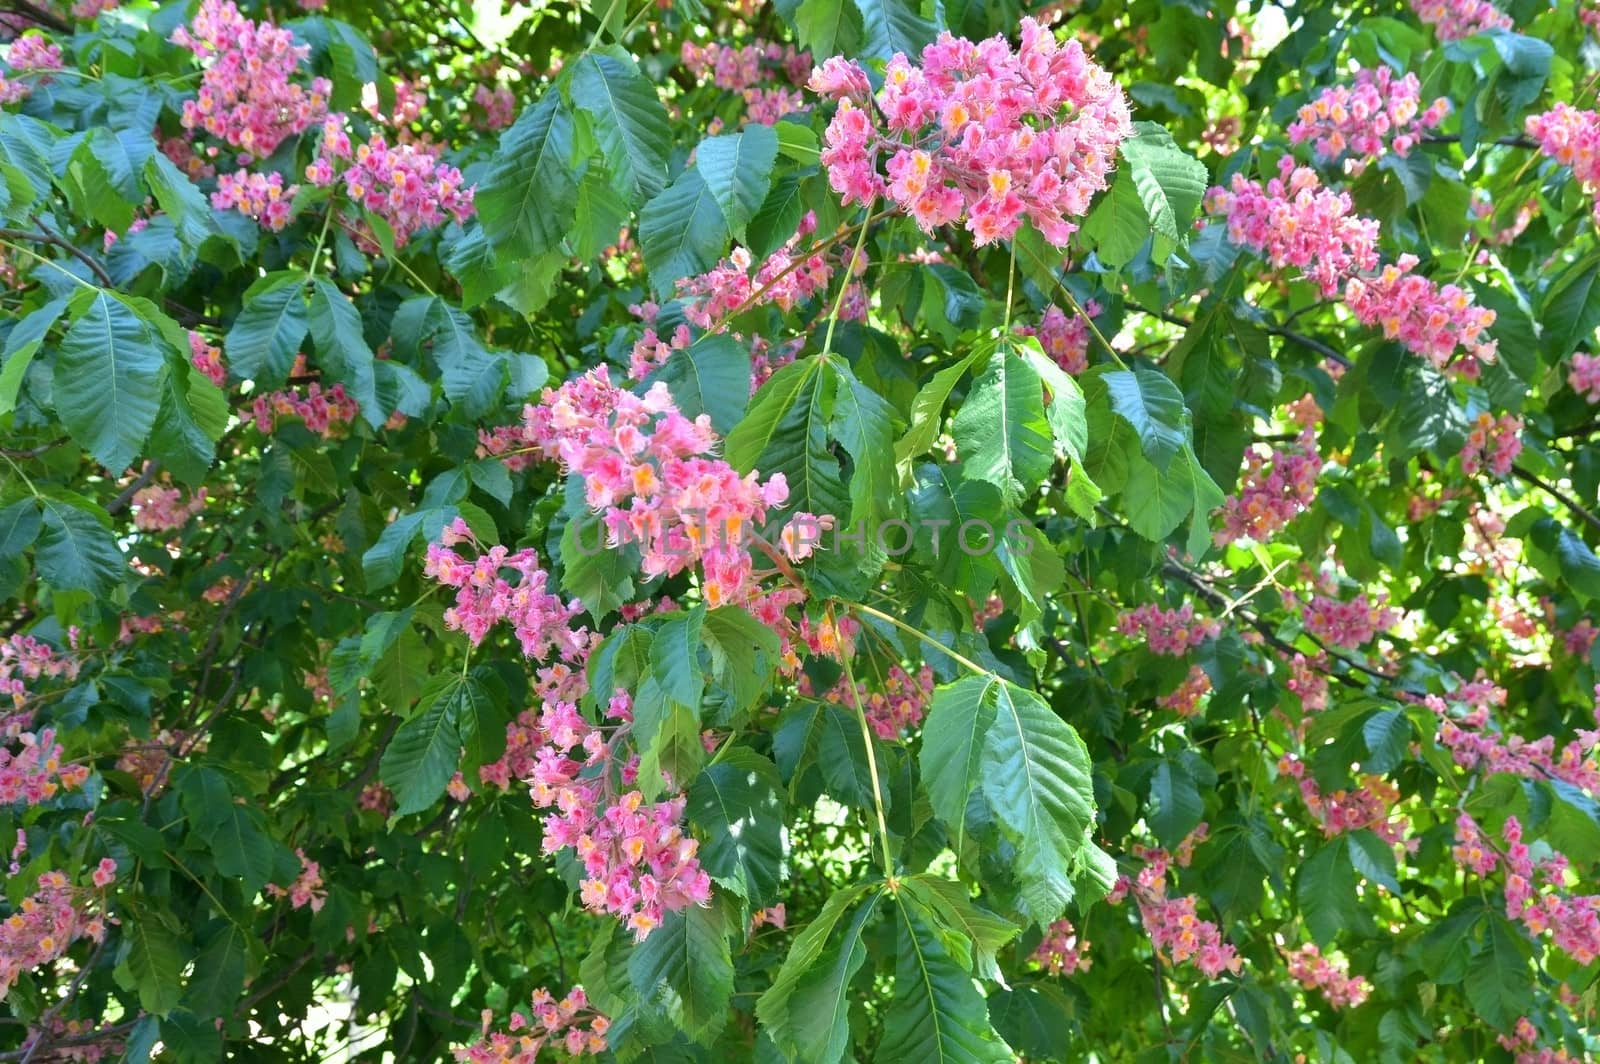 Chectnut tree blooming  in May